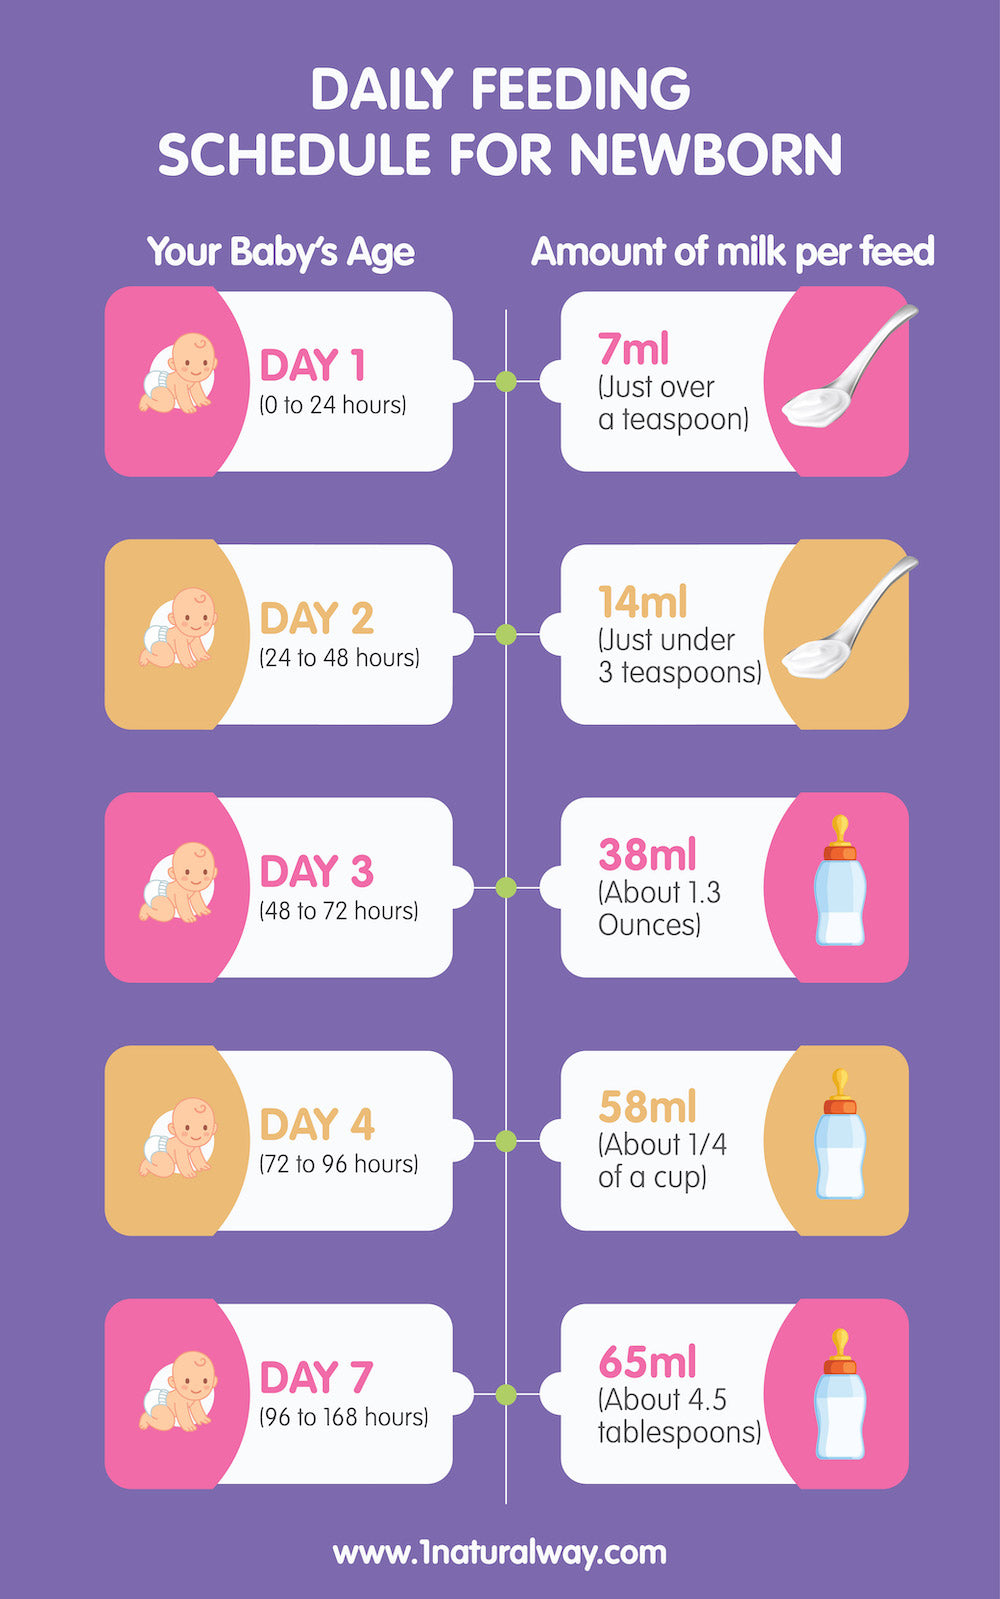 Breastfeeding Timeline: What You and 